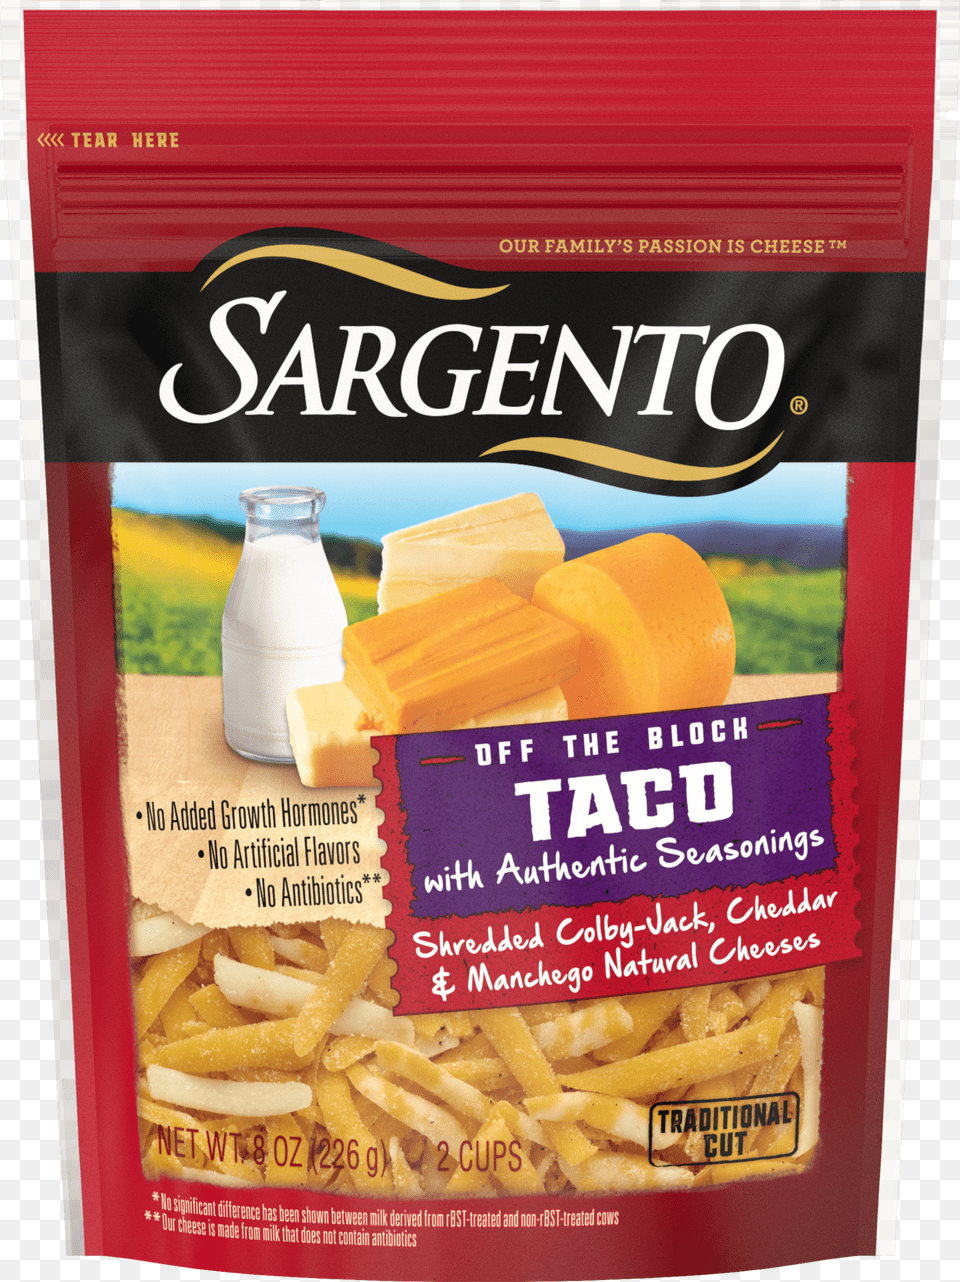 Sargento Shredded Taco Natural Cheese With Authentic Sargento 4 Cheese Mexican, Animal, Fish, Manta Ray, Sea Life Png Image